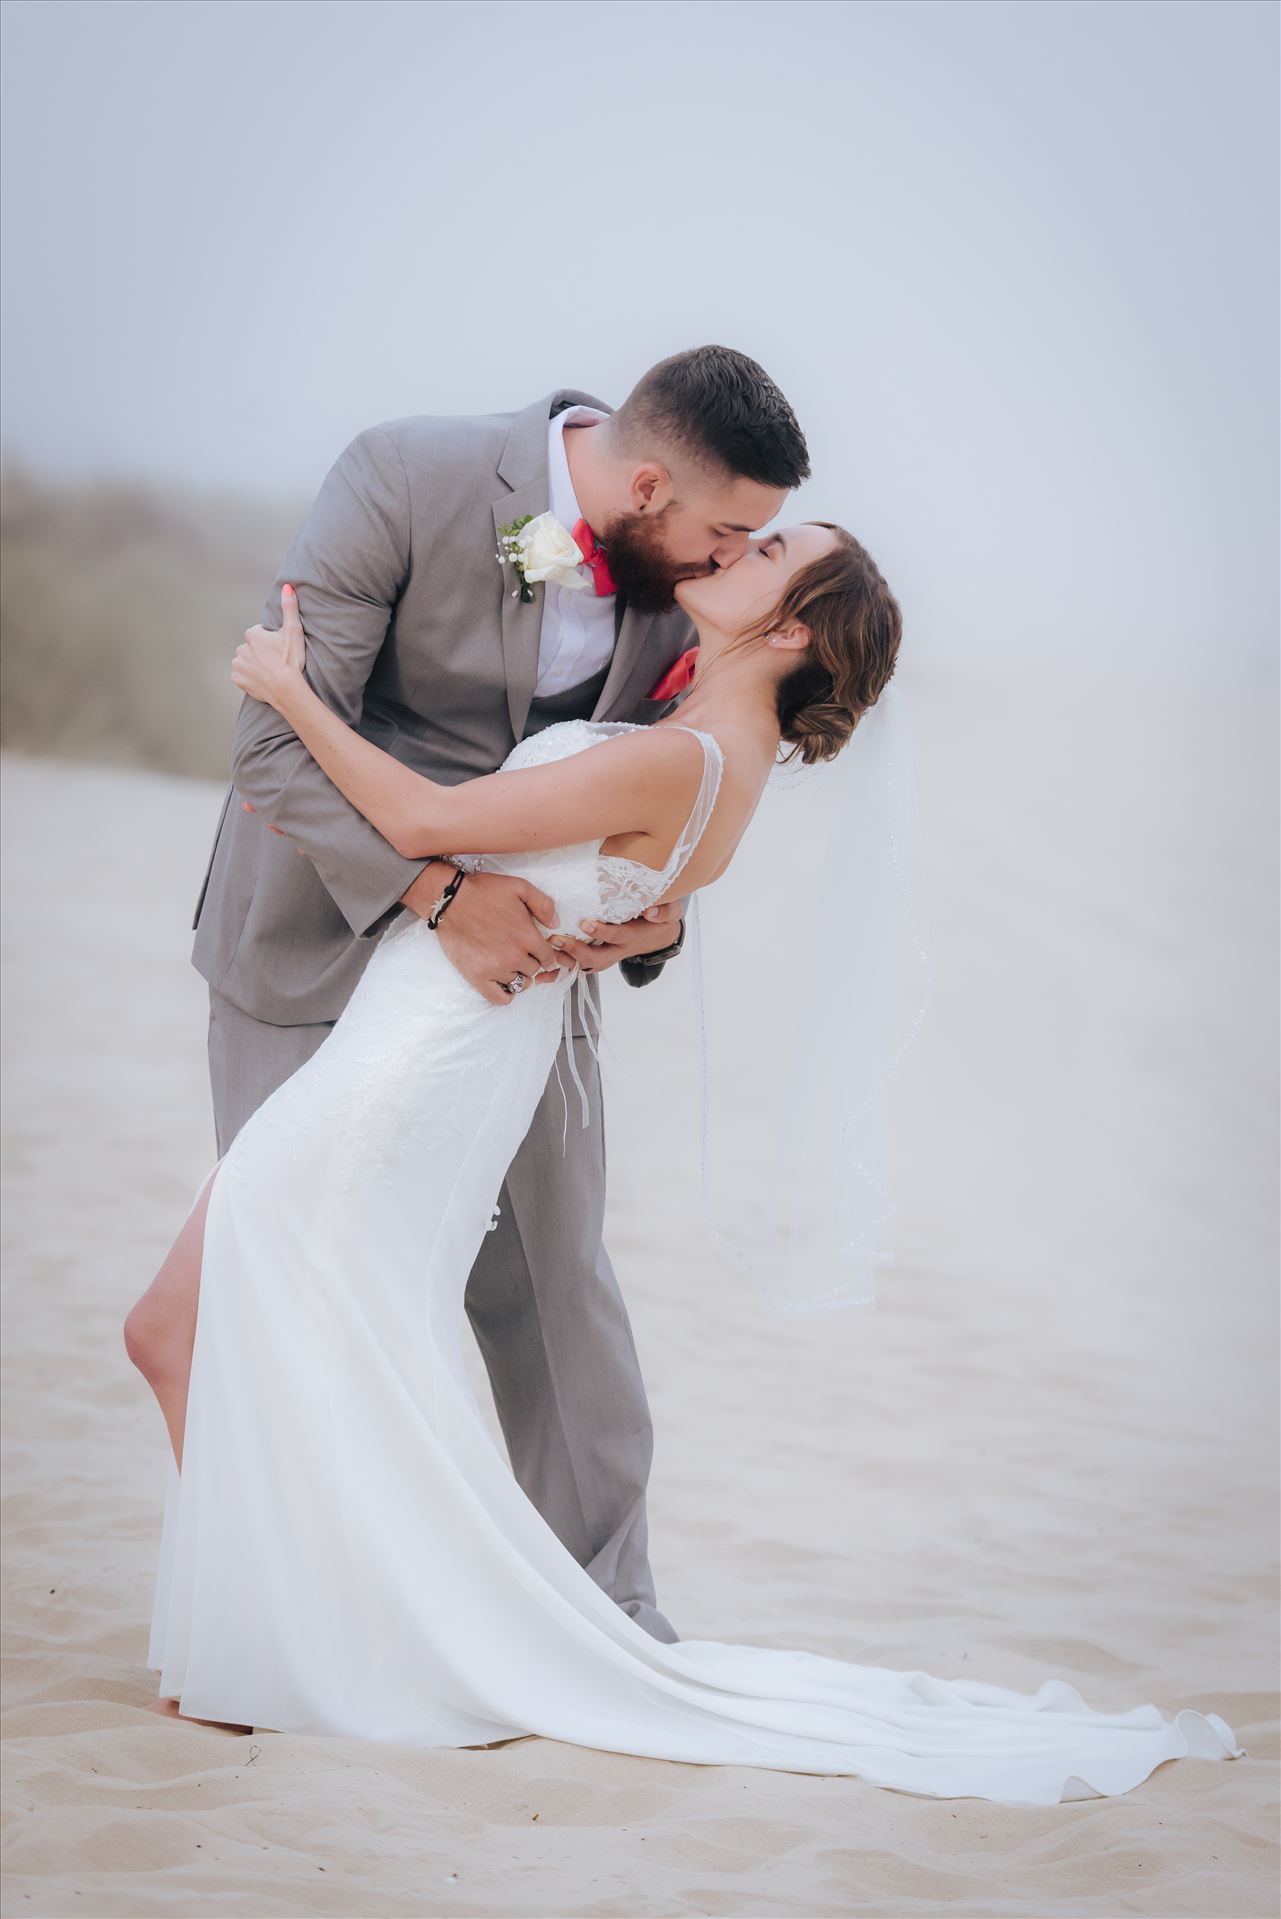 FW-8130.jpg - Romantic wedding in the sand on Grover Beach in California.  Barefoot with surfboards and driftwood, tent and ceremony set up by Beach Butlerz, wedding photography by Mirror's Edge Photography.  Romantic Bride and Groom dip in the fog by Sarah Williams